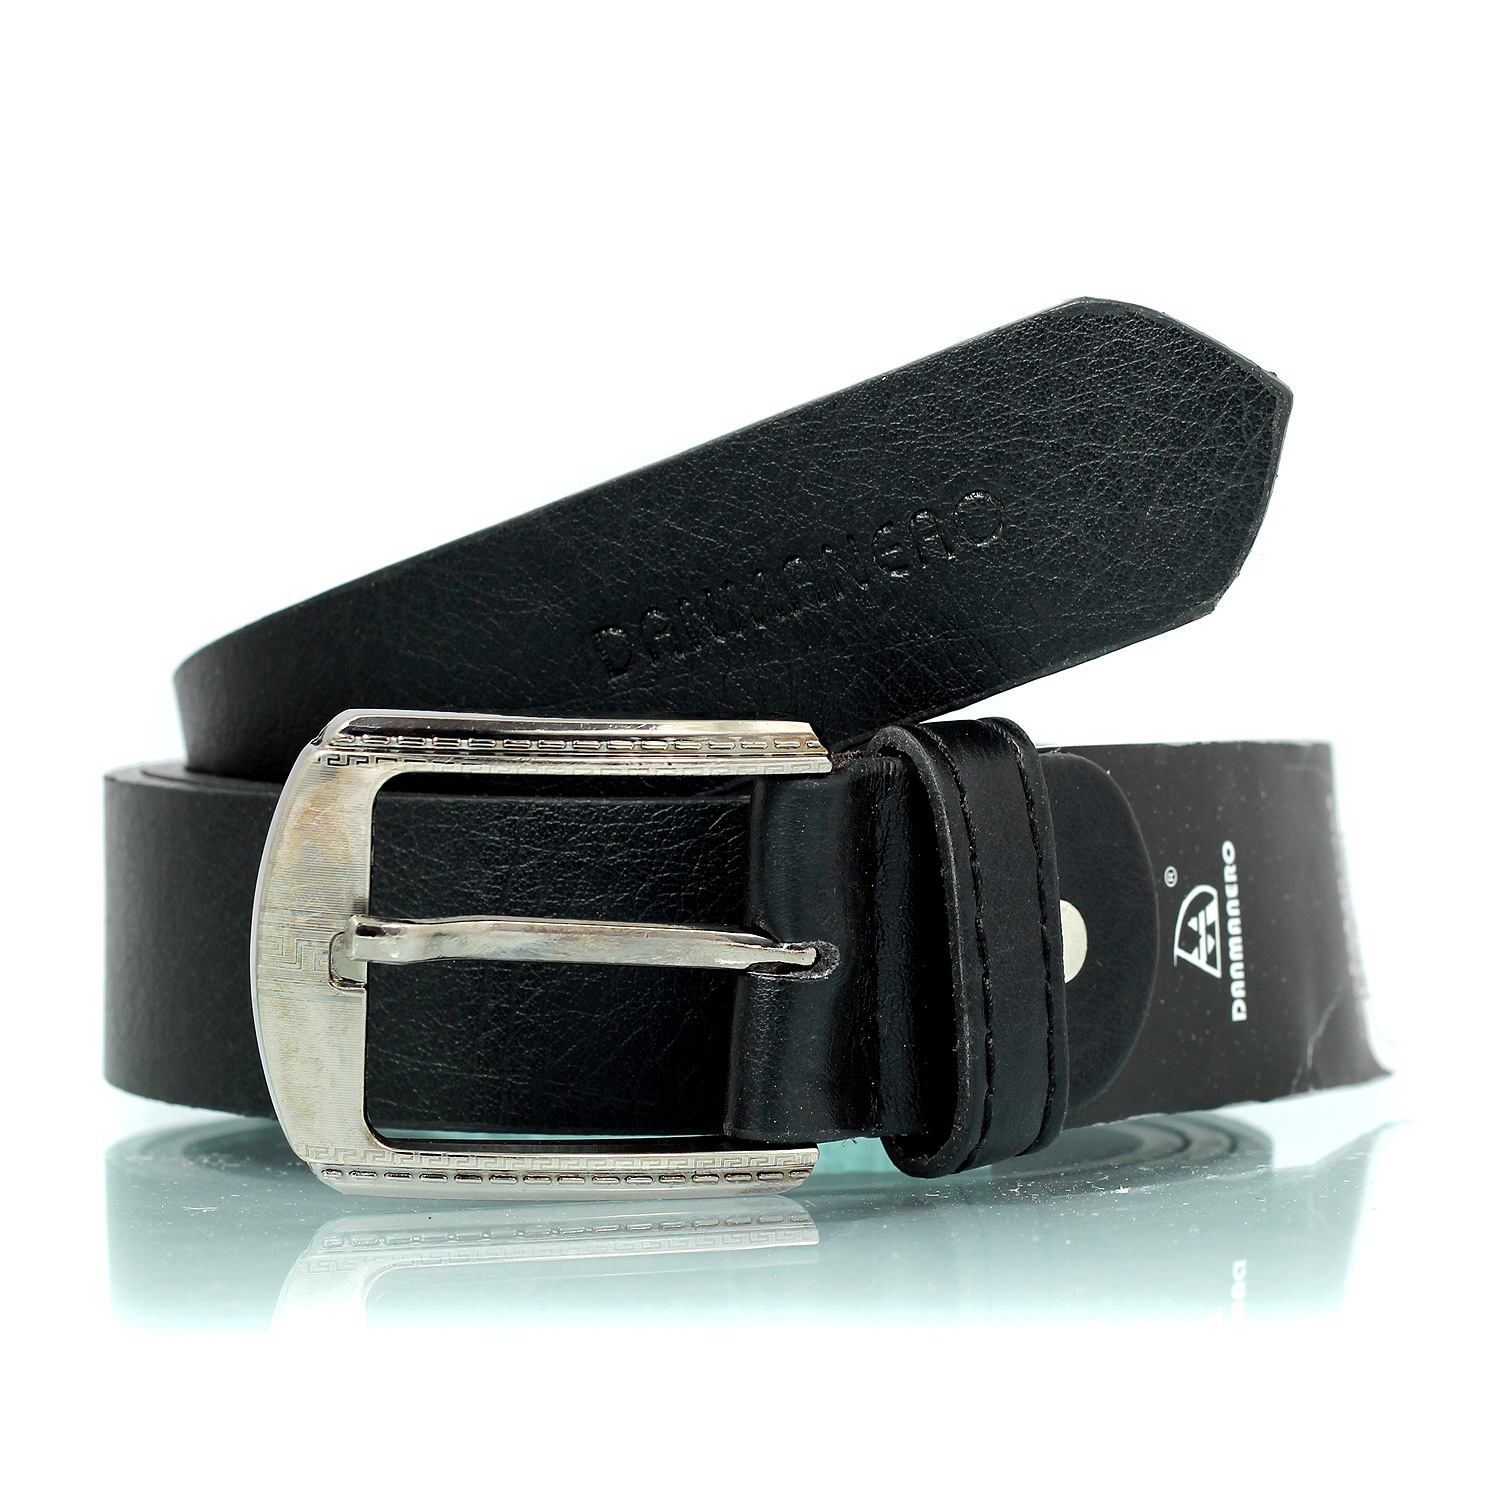 Newly designed textured leather belt with stylish buckle